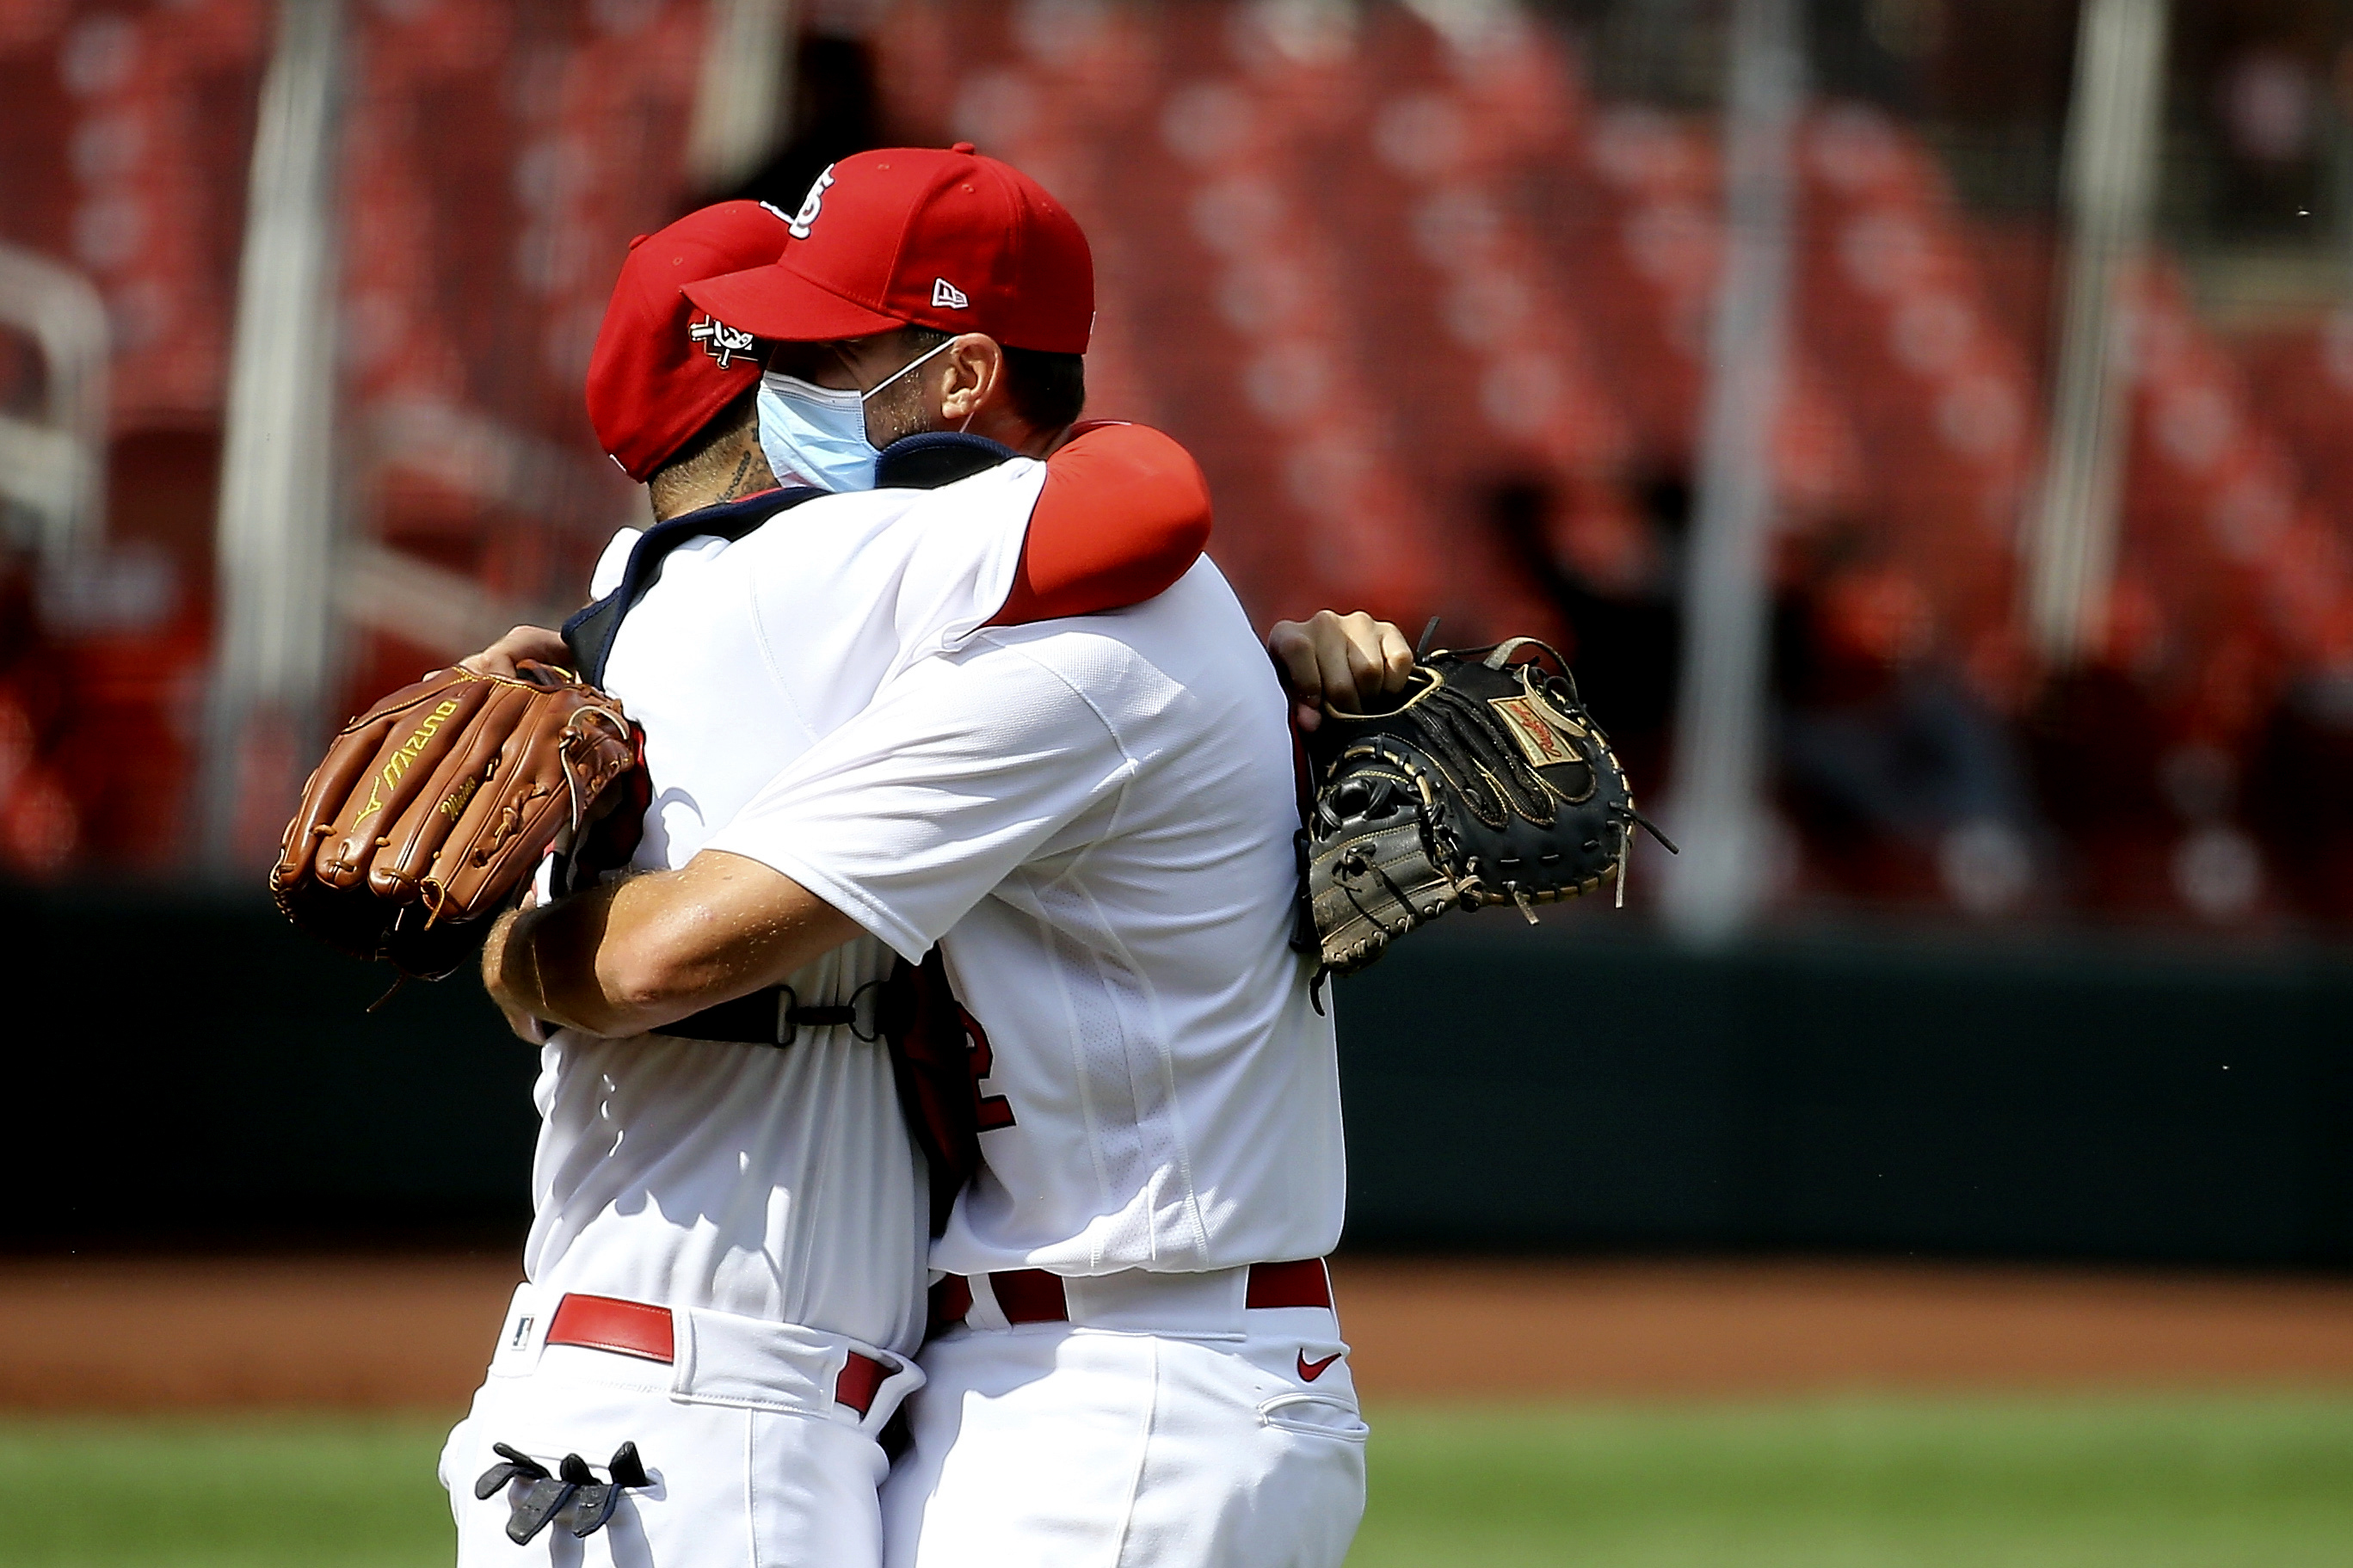 Wainwright throws CG on 39th birthday, Cards top Indians 7-2